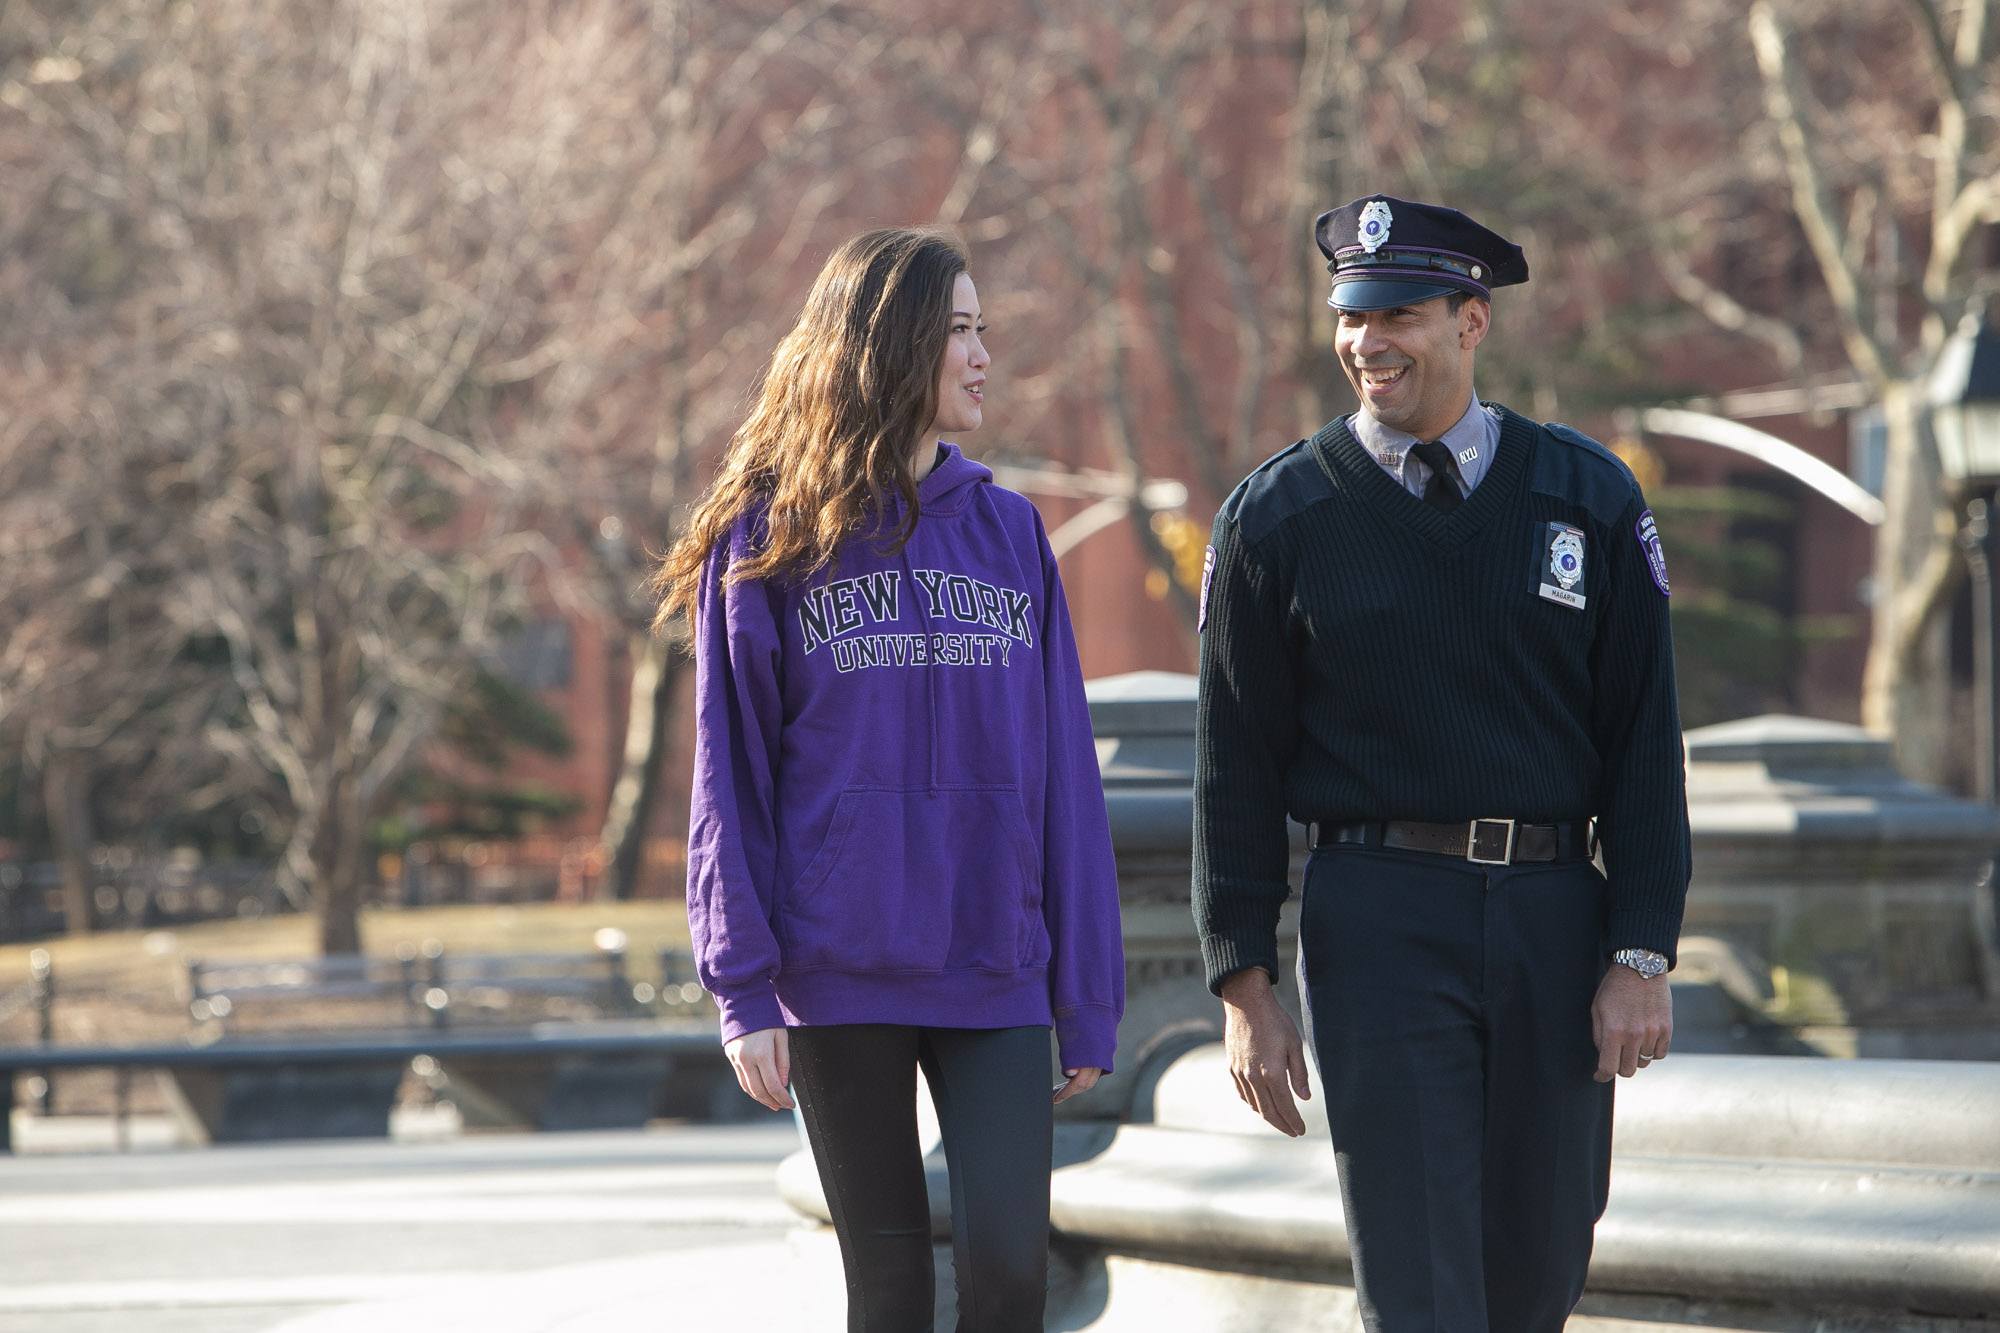 Public safety officer walking and talking with a student